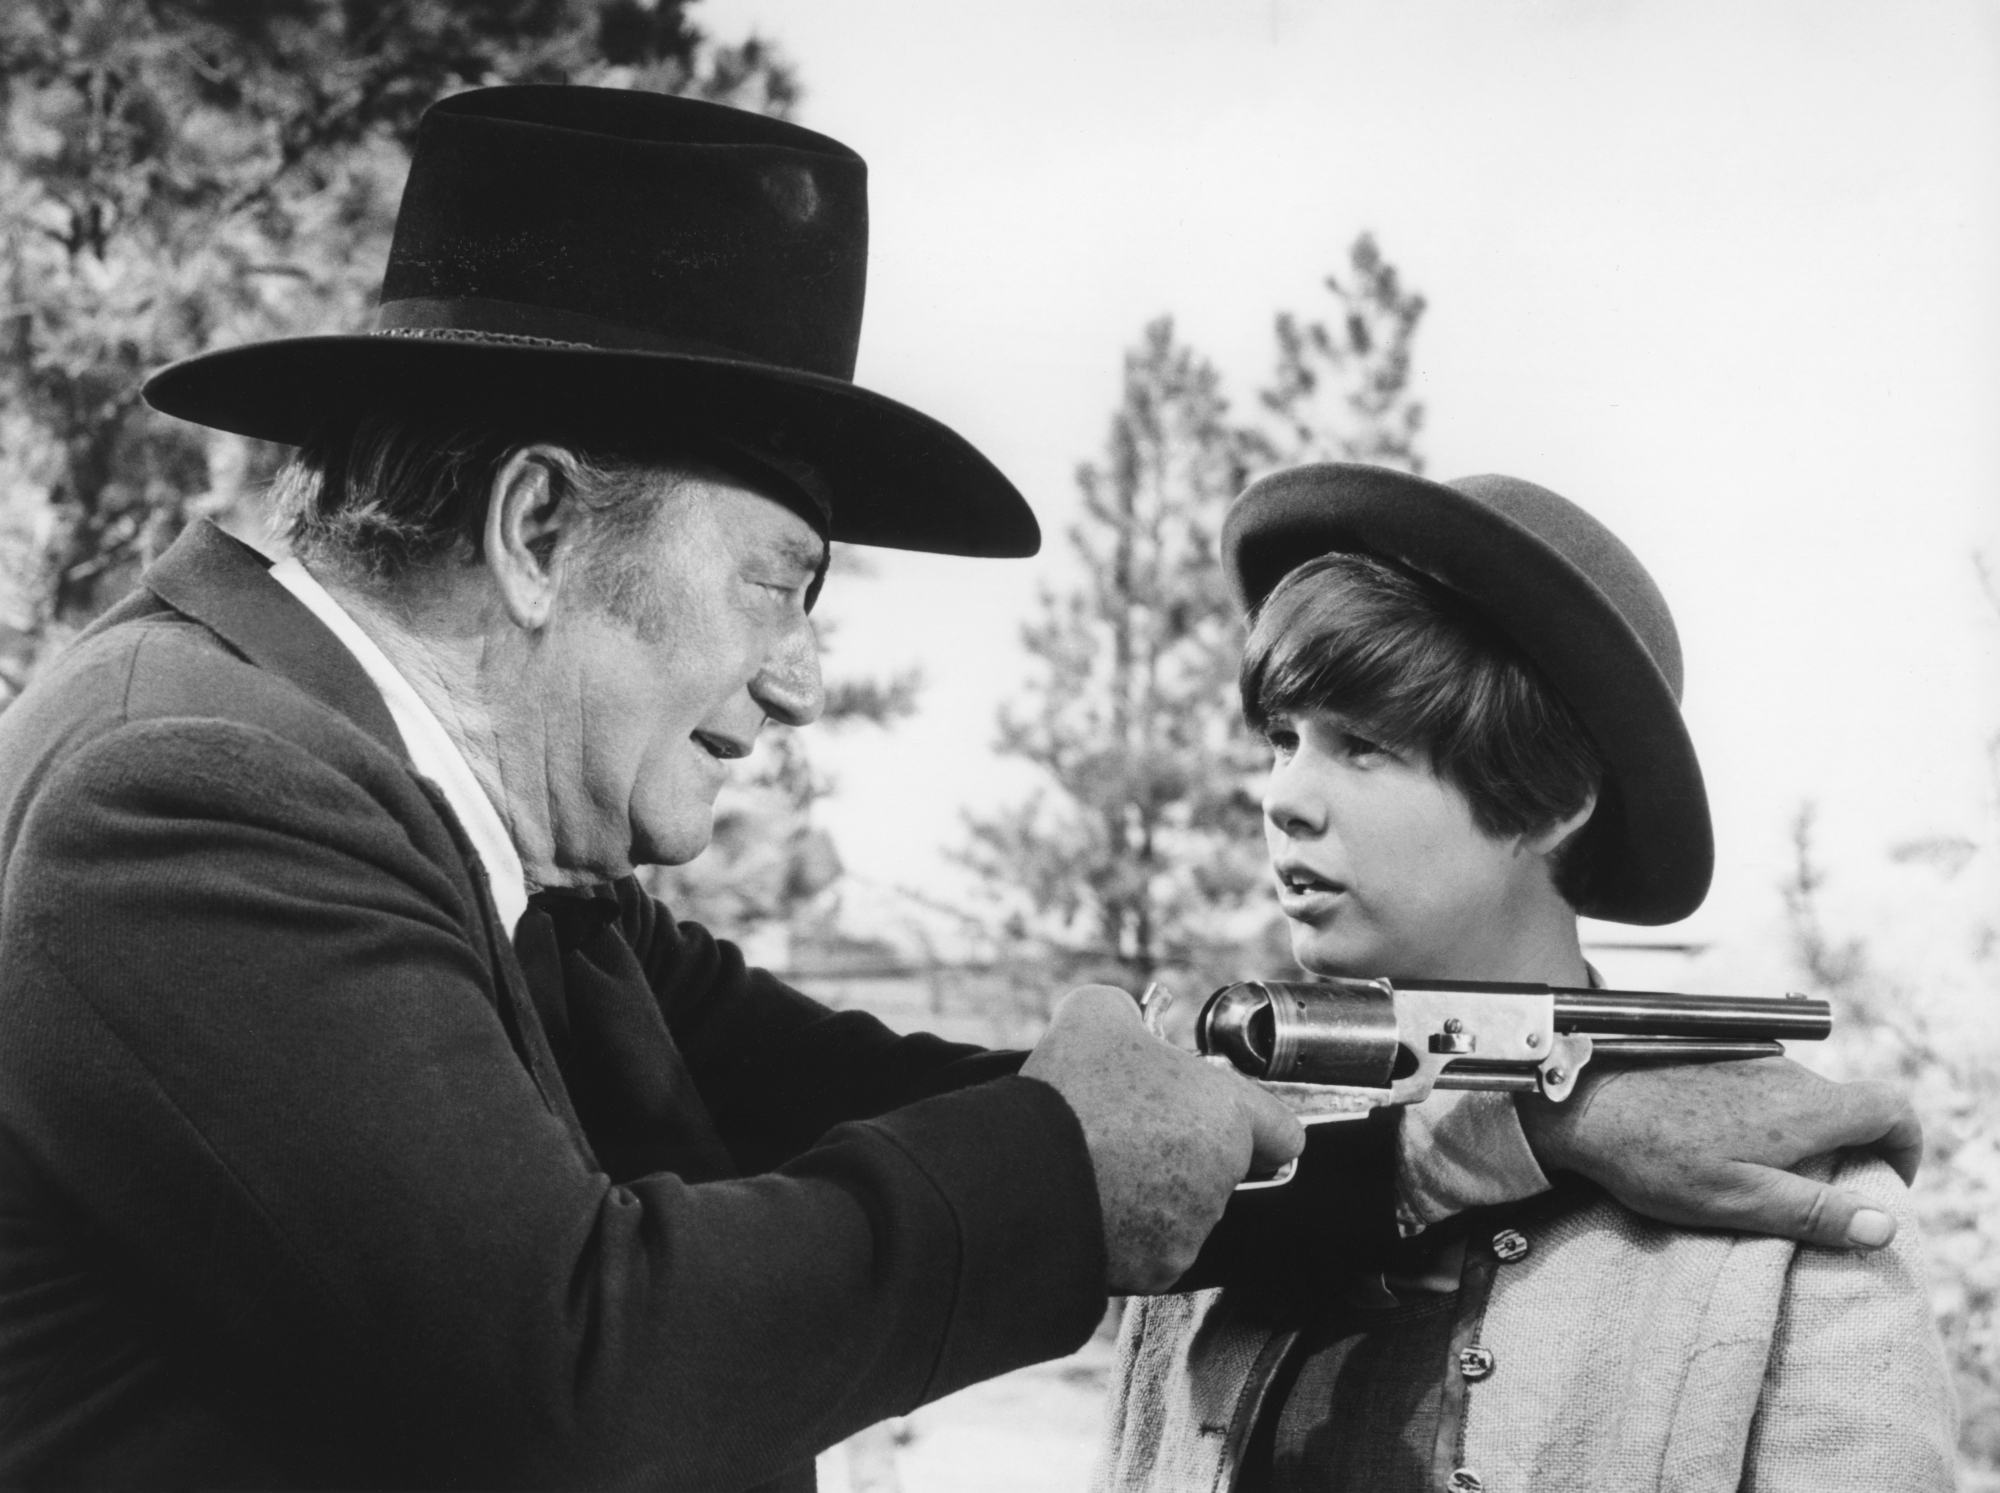 'True Grit' John Wayne as Rooster Cogburn and Kim Darby as Mattie Ross looking at each other with Wayne holding a gun over her shoulder